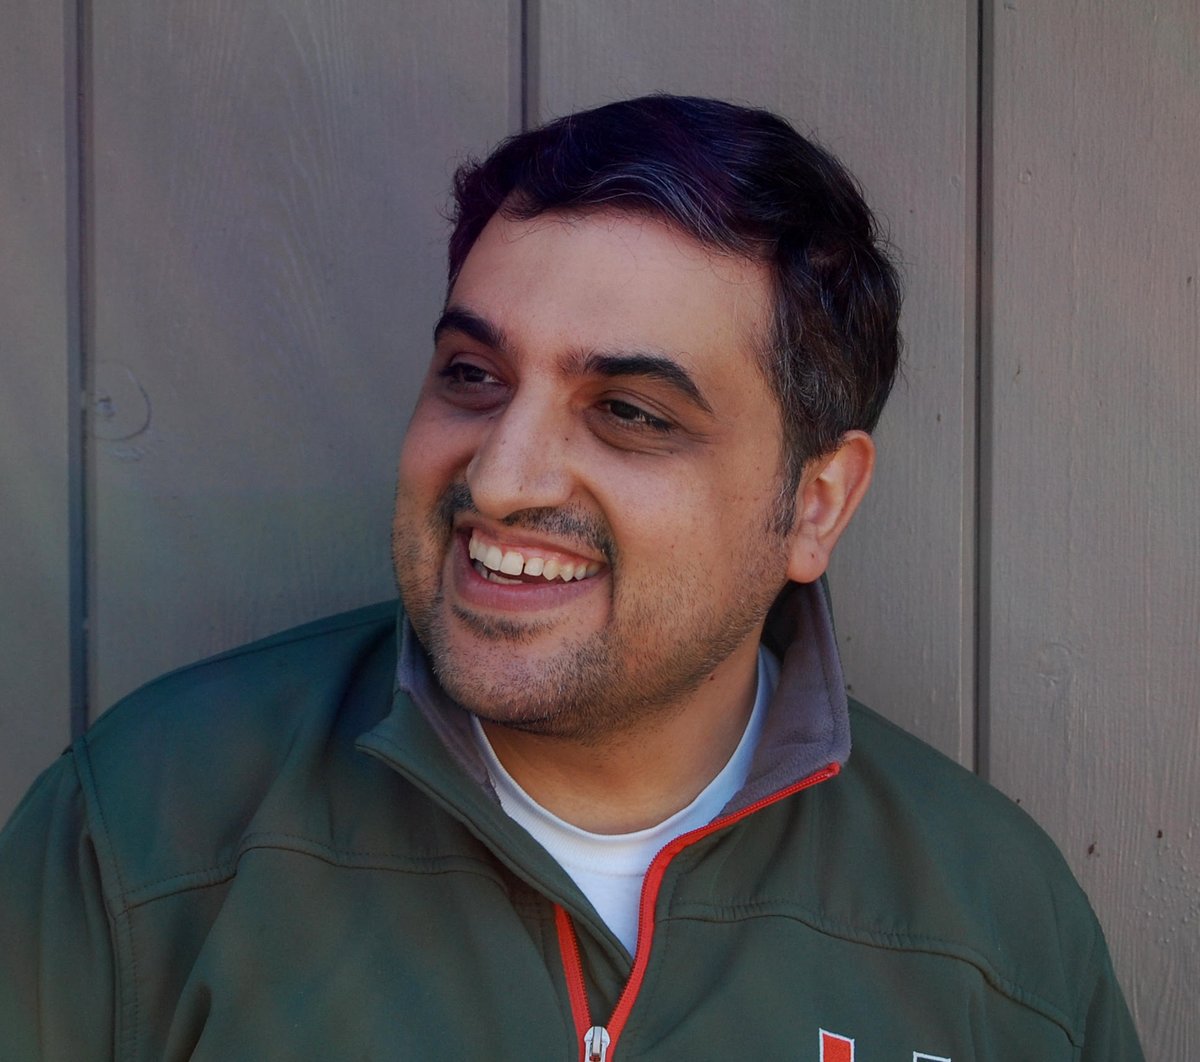 How well do you know @FullDRadio's @robenfarzad? Get to know him better in @WVTFRADIOIQ's newsletter. Sign up at wvtf.org/inside-iq-wvtf…. #weloverobenfarzad #publicradiopodcasts #wvtfradioiq